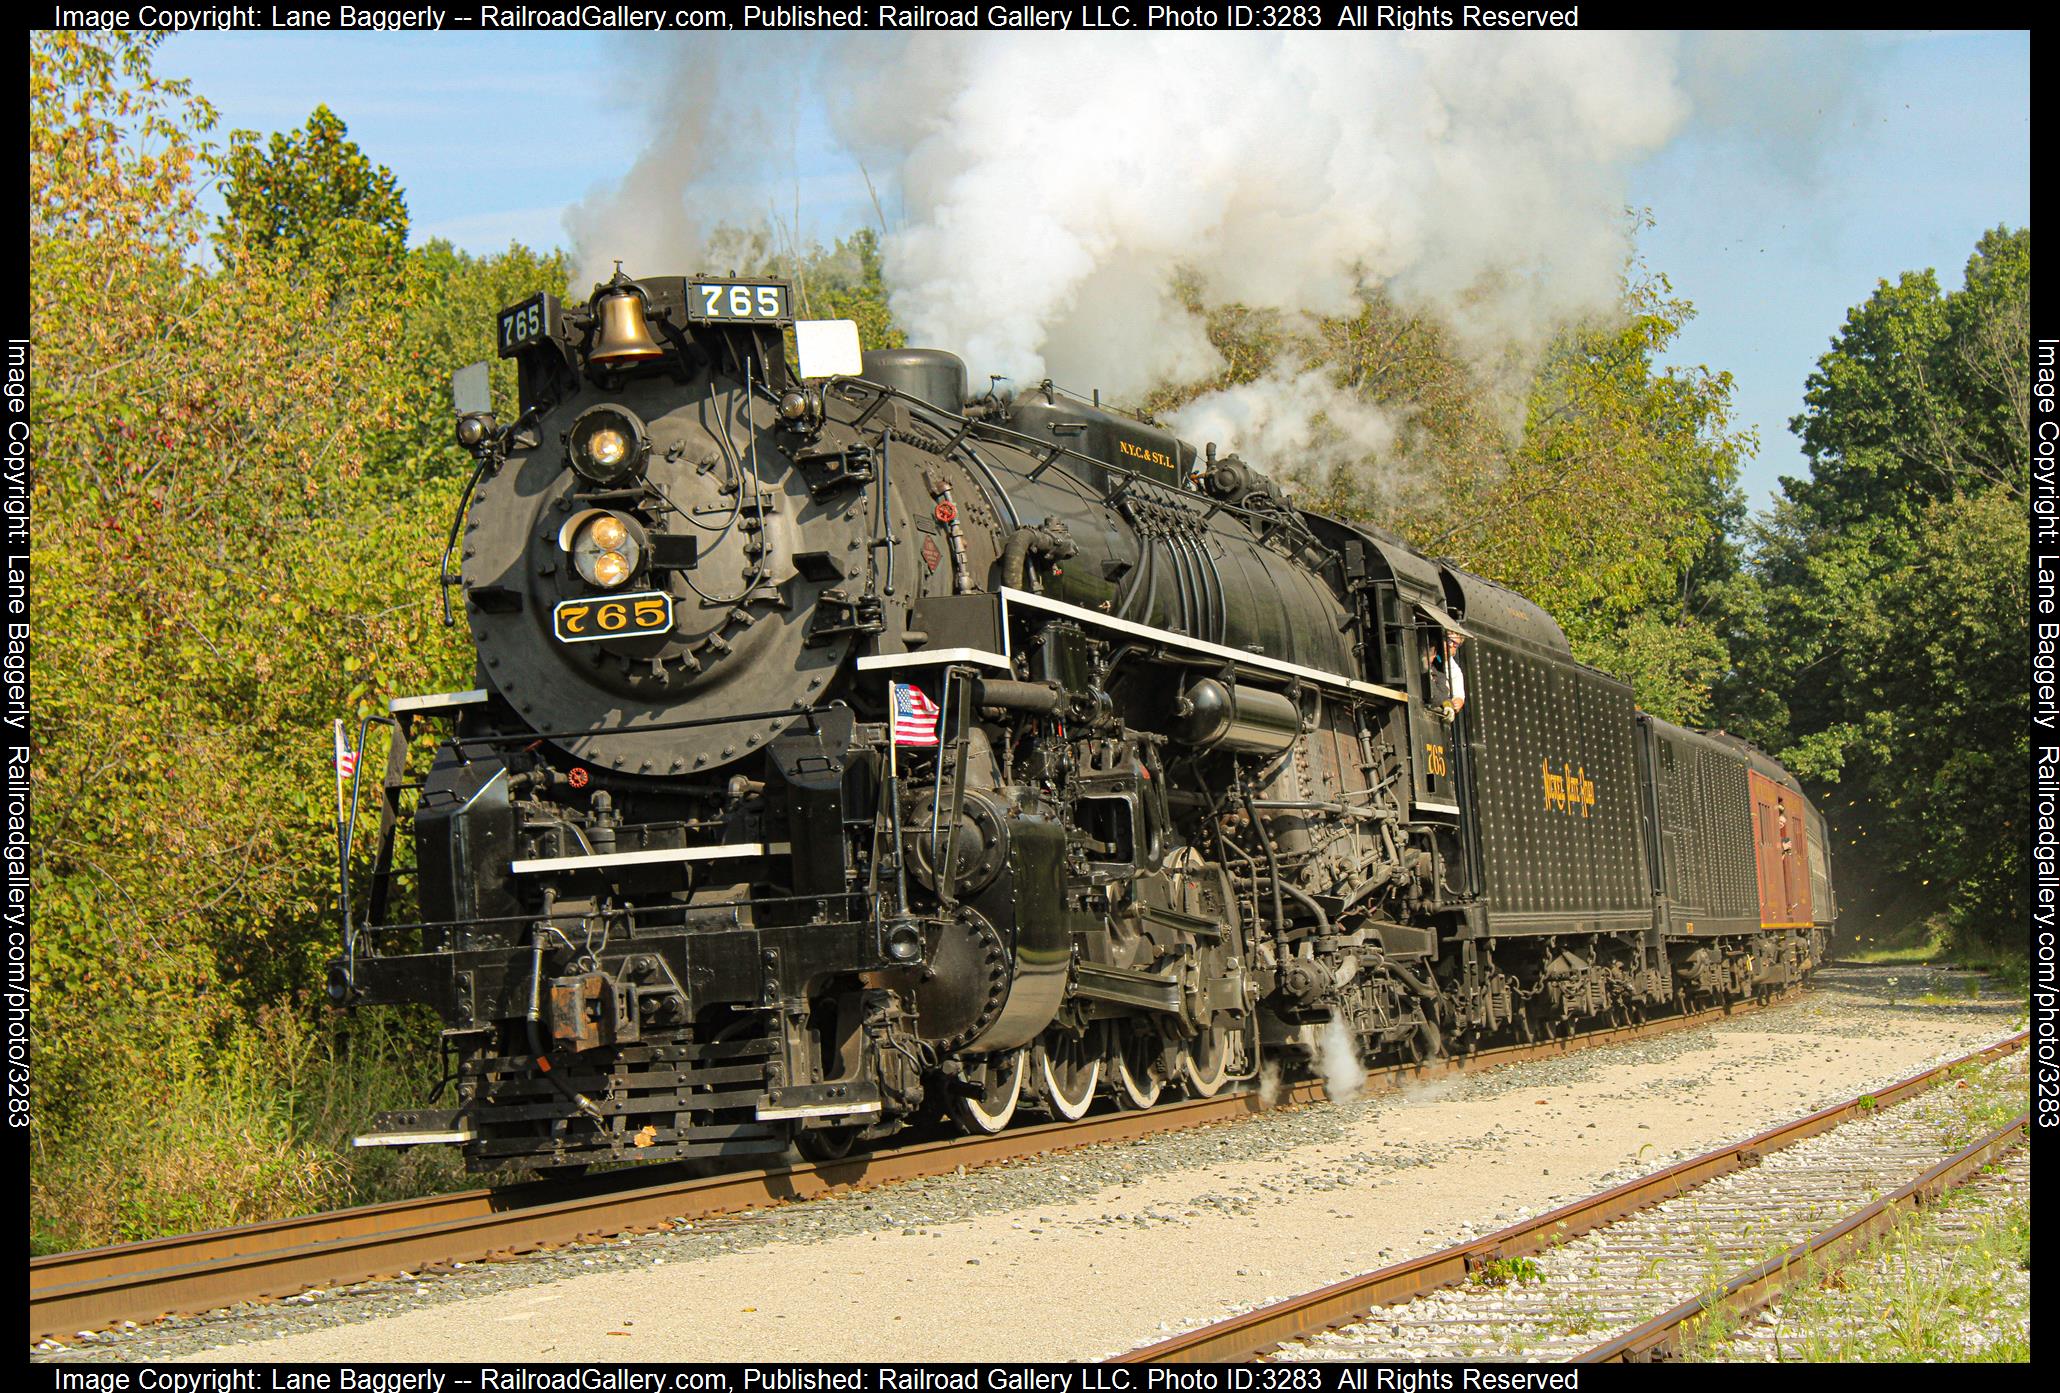 NKP 765 is a class 2-8-4 and  is pictured in Peninsula, Ohio, United States.  This was taken along the CVSR on the Cuyahoga Valley Scenic Railroad. Photo Copyright: Lane Baggerly uploaded to Railroad Gallery on 04/12/2024. This photograph of NKP 765 was taken on Saturday, September 18, 2021. All Rights Reserved. 